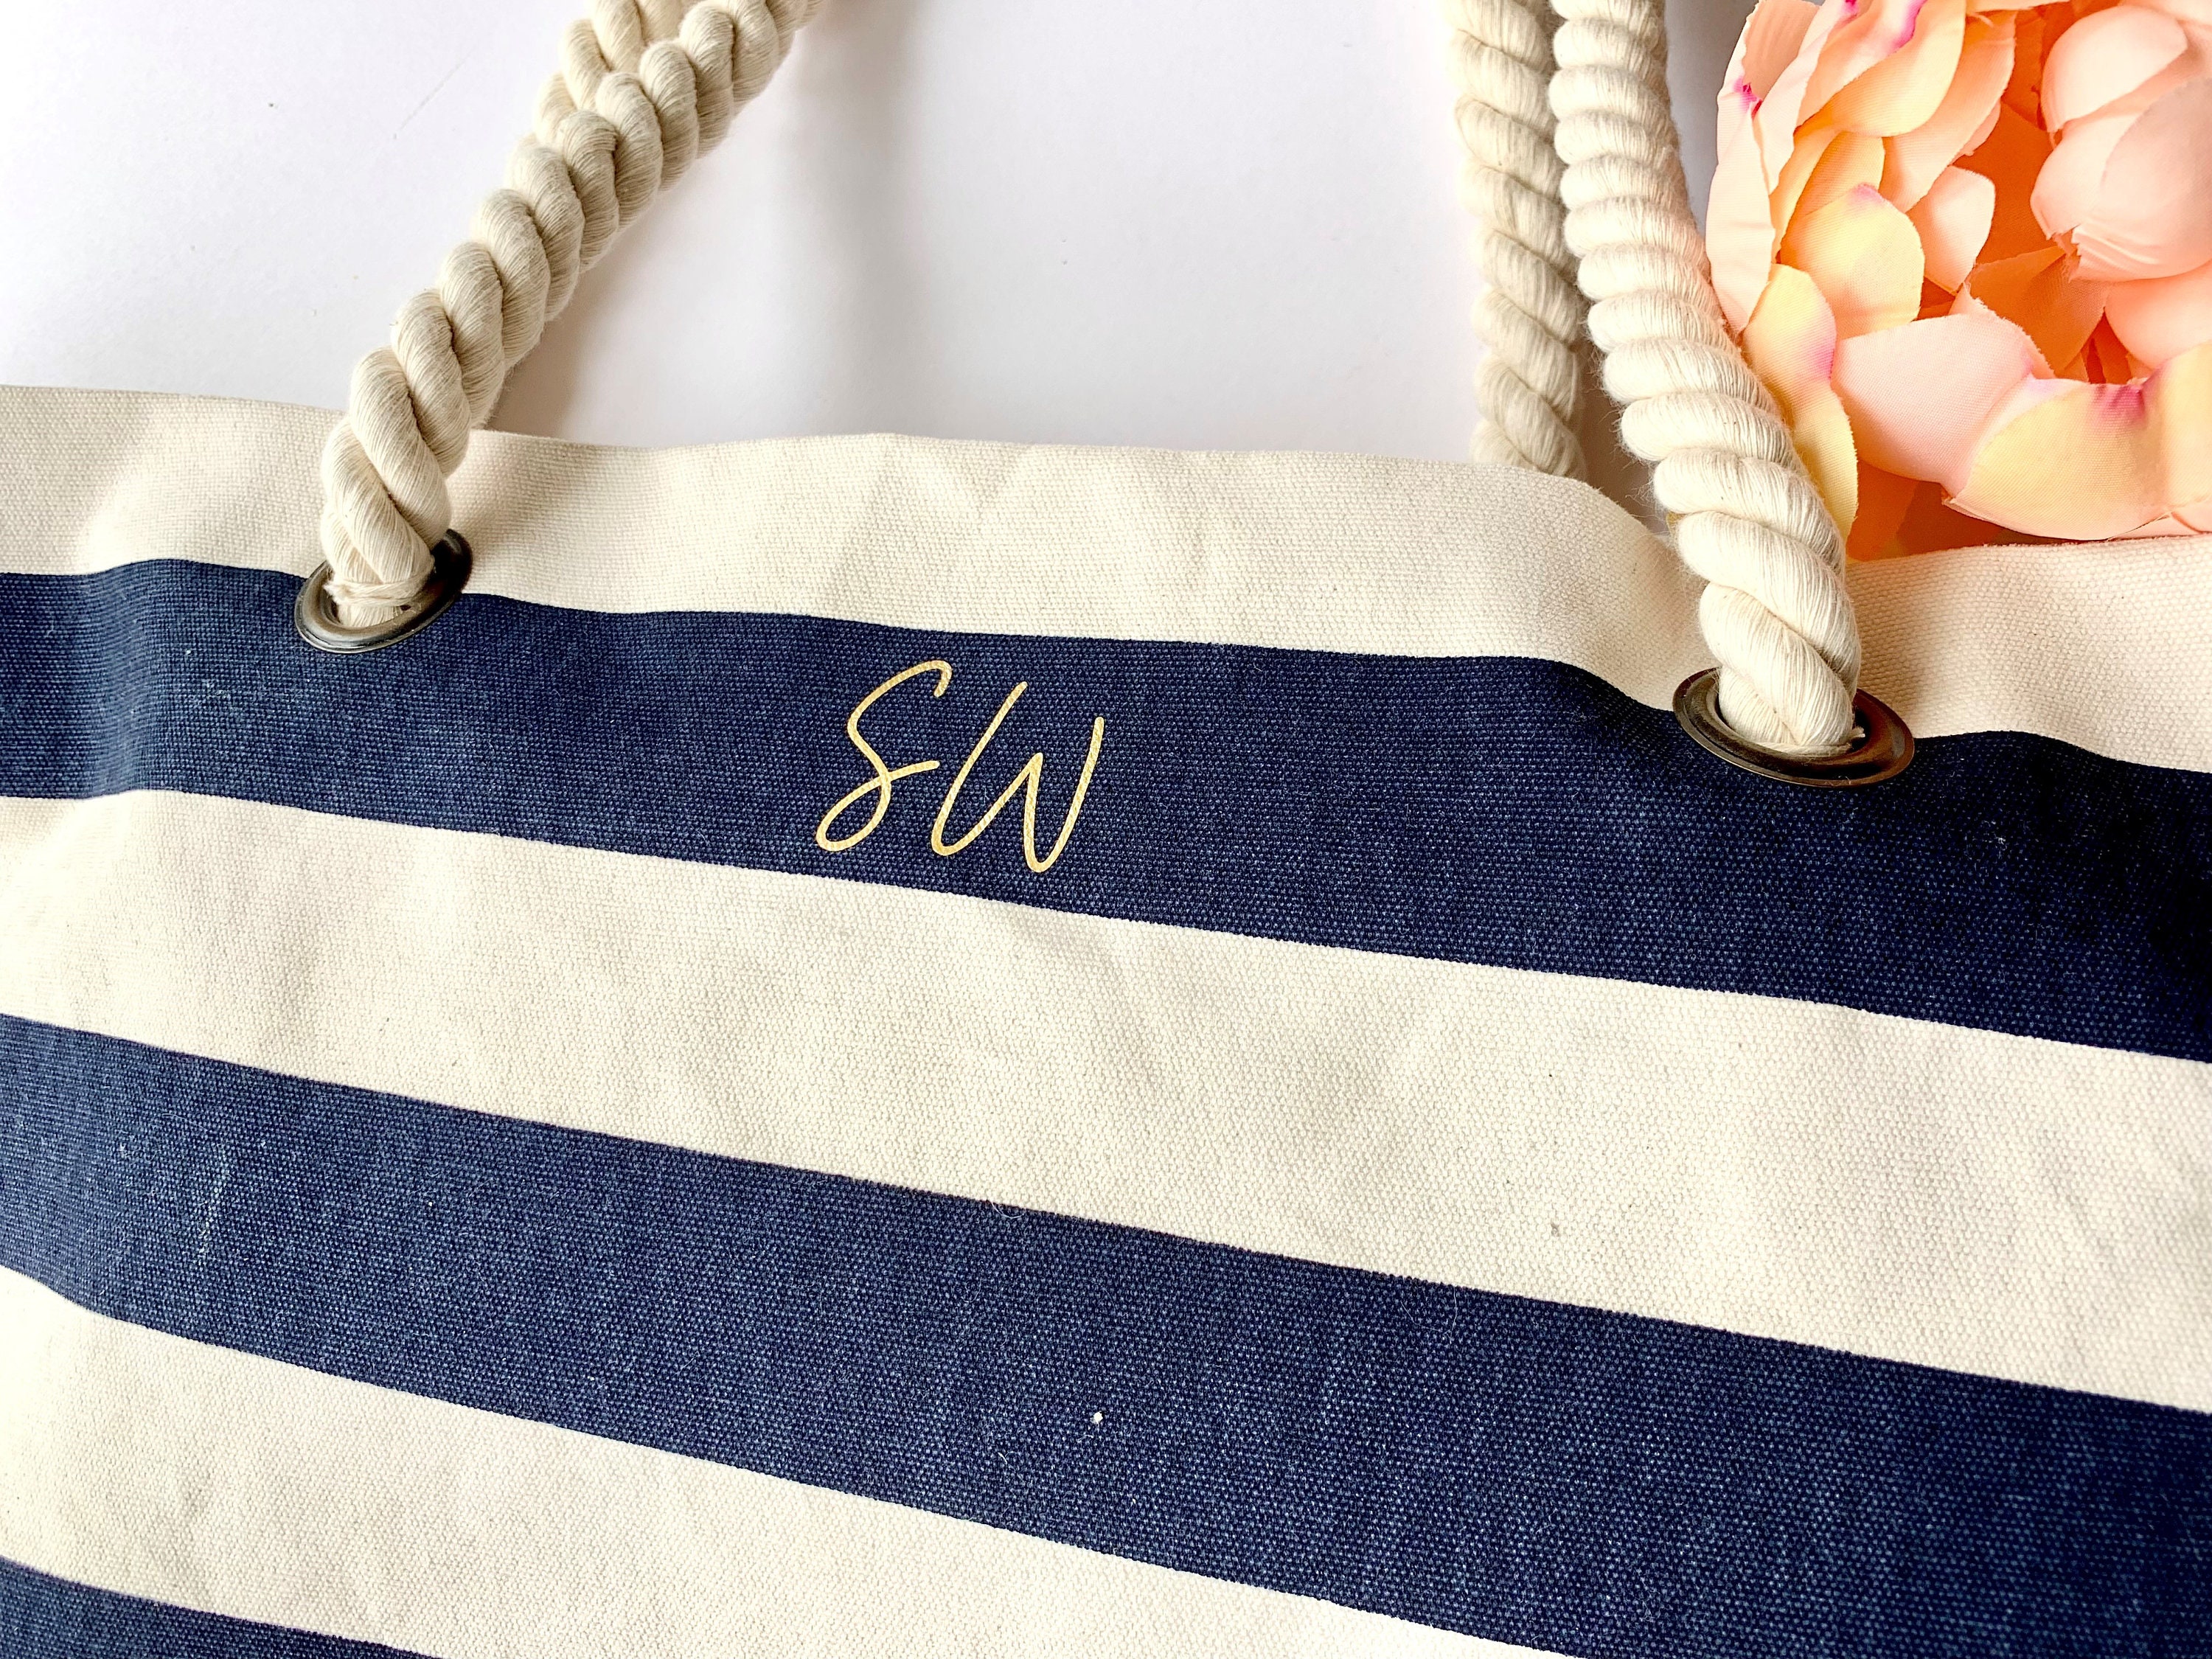 Clearance!SDJMa Initial Printed Canvas Tote Bag, Personalized Shoulder  Handbag with Inner Zipper Pocket, Open Beach Bag for Vacation, Present Bag  for Wedding, Birthday, Holiday 